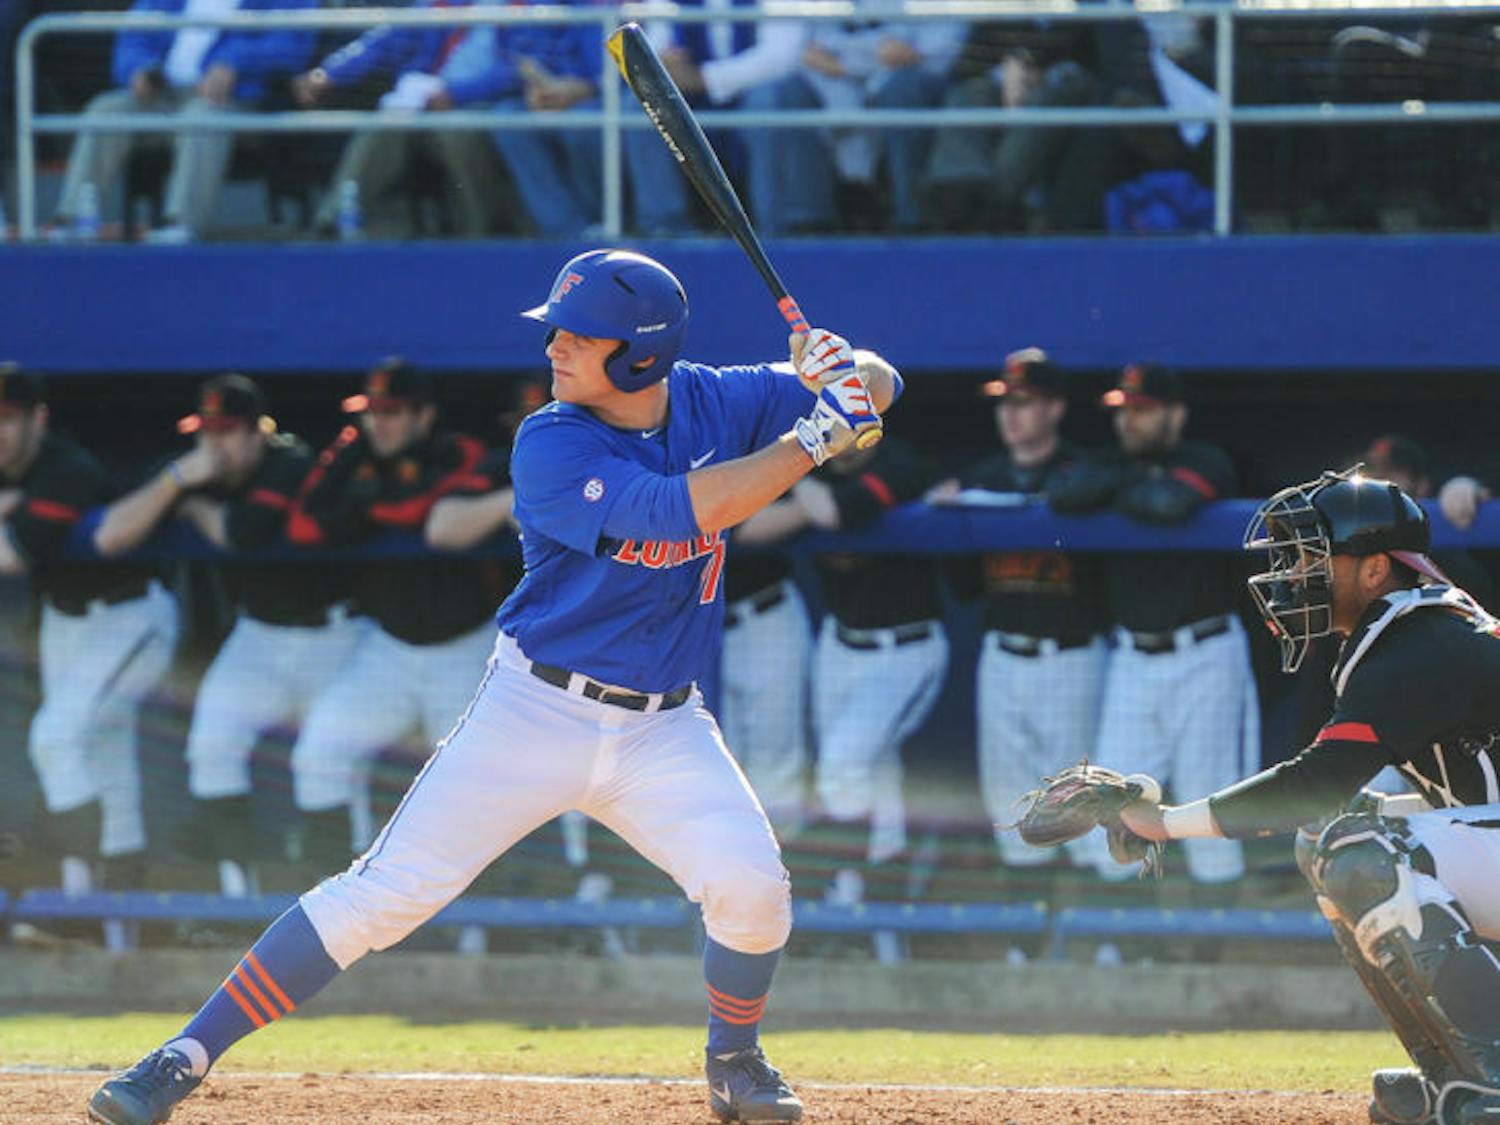 Taylor Gushue bats during Florida’s 9-7 loss against Maryland on Saturday at McKethan Stadium. Gushue drove in three runs in UF’s 8-5 win on Sunday.